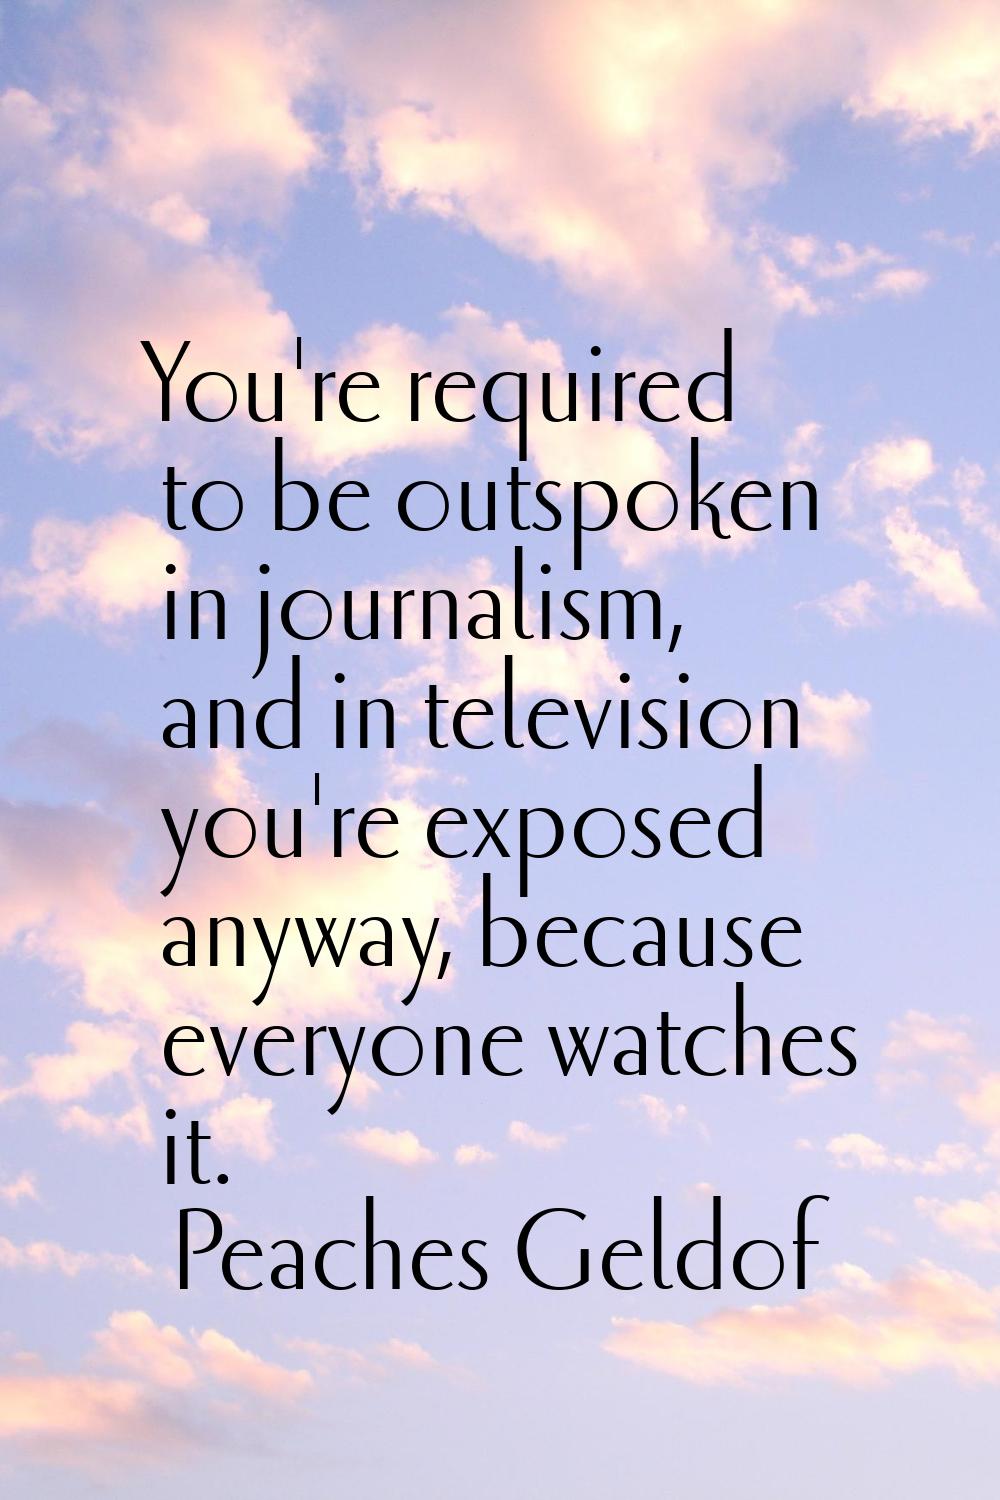 You're required to be outspoken in journalism, and in television you're exposed anyway, because eve